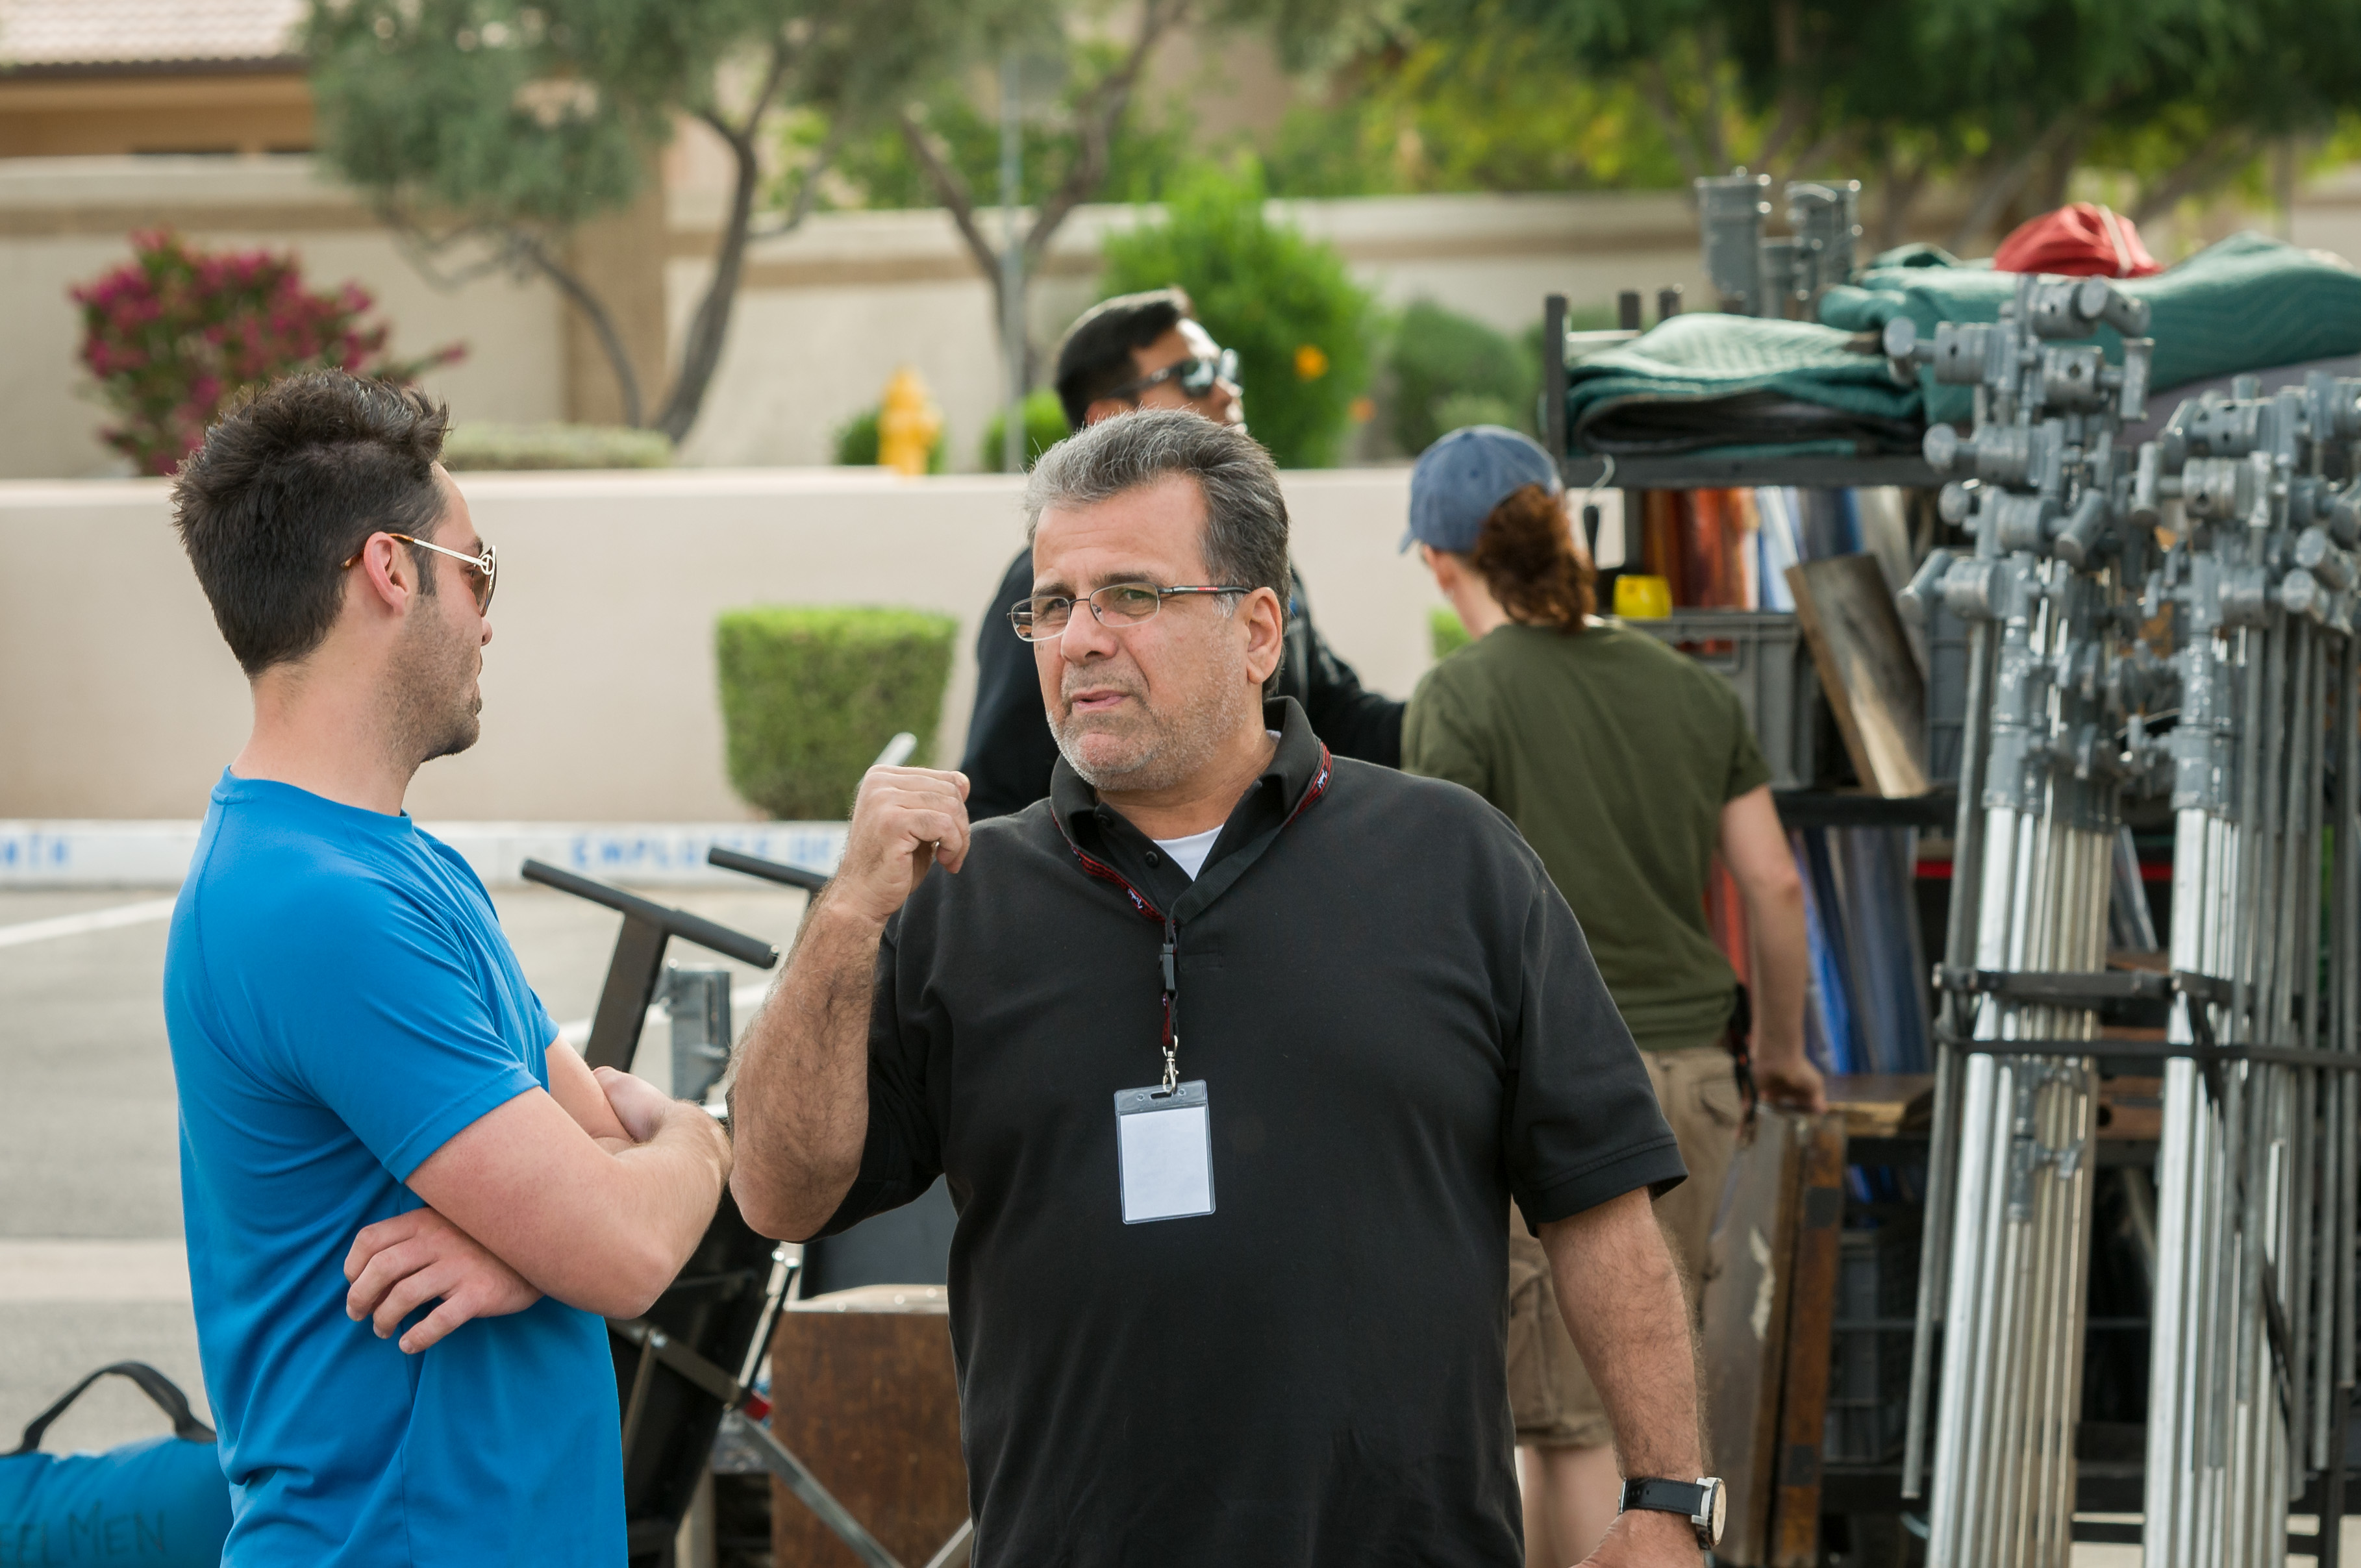 Executive Producer George Nemeh! Always has shown respect for individuals who are part of our cast or crew on location. Every person counts.